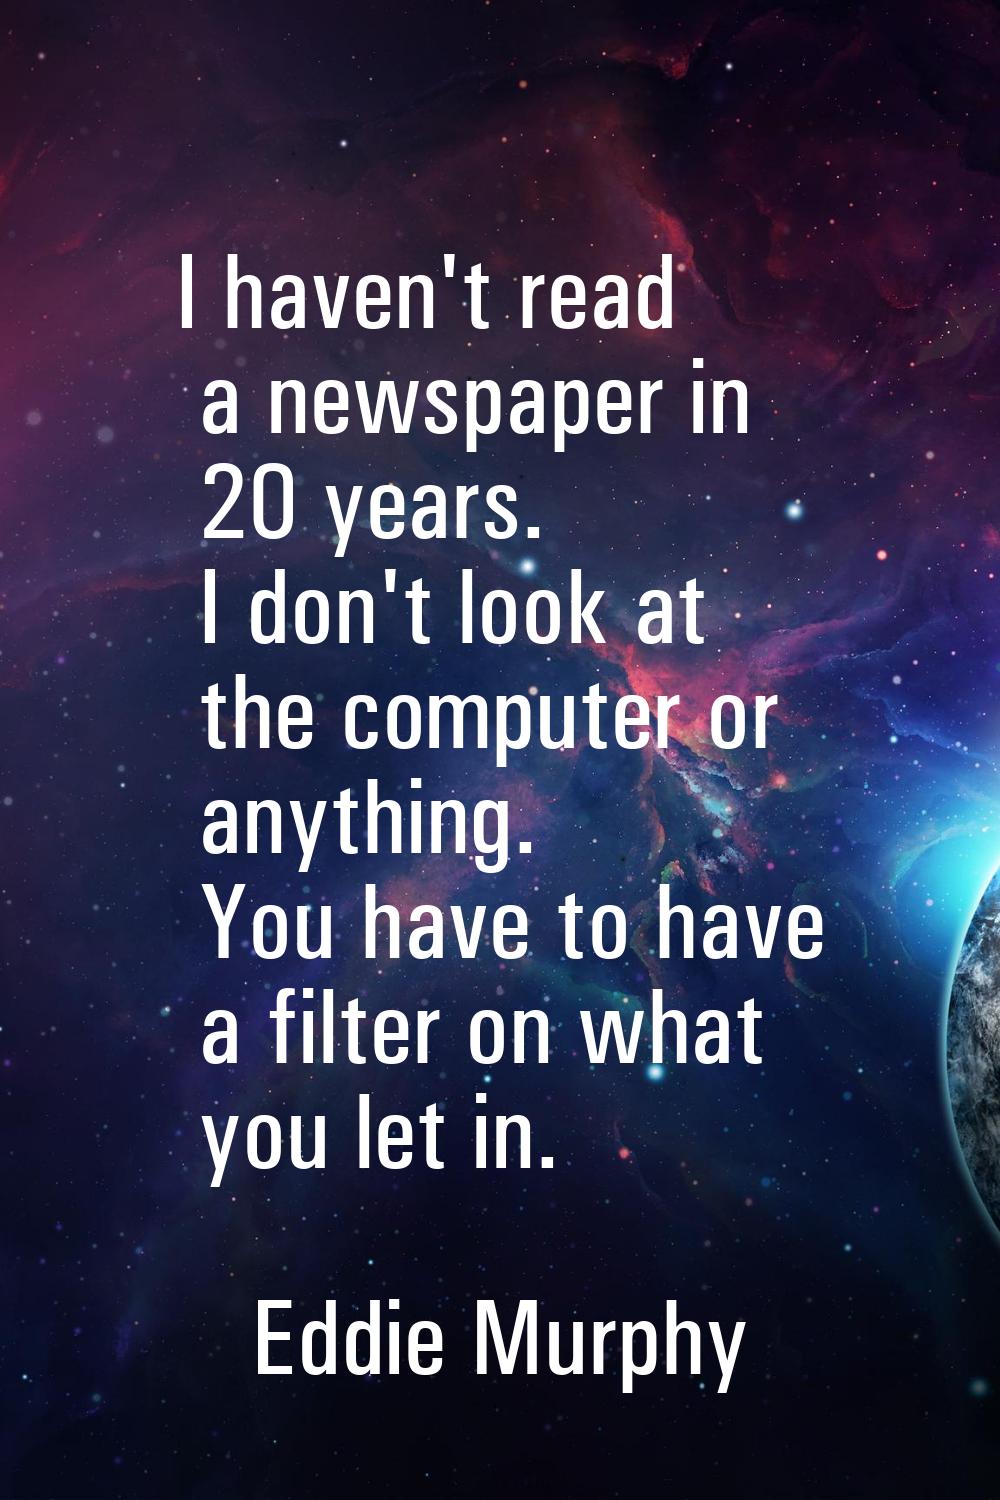 I haven't read a newspaper in 20 years. I don't look at the computer or anything. You have to have 